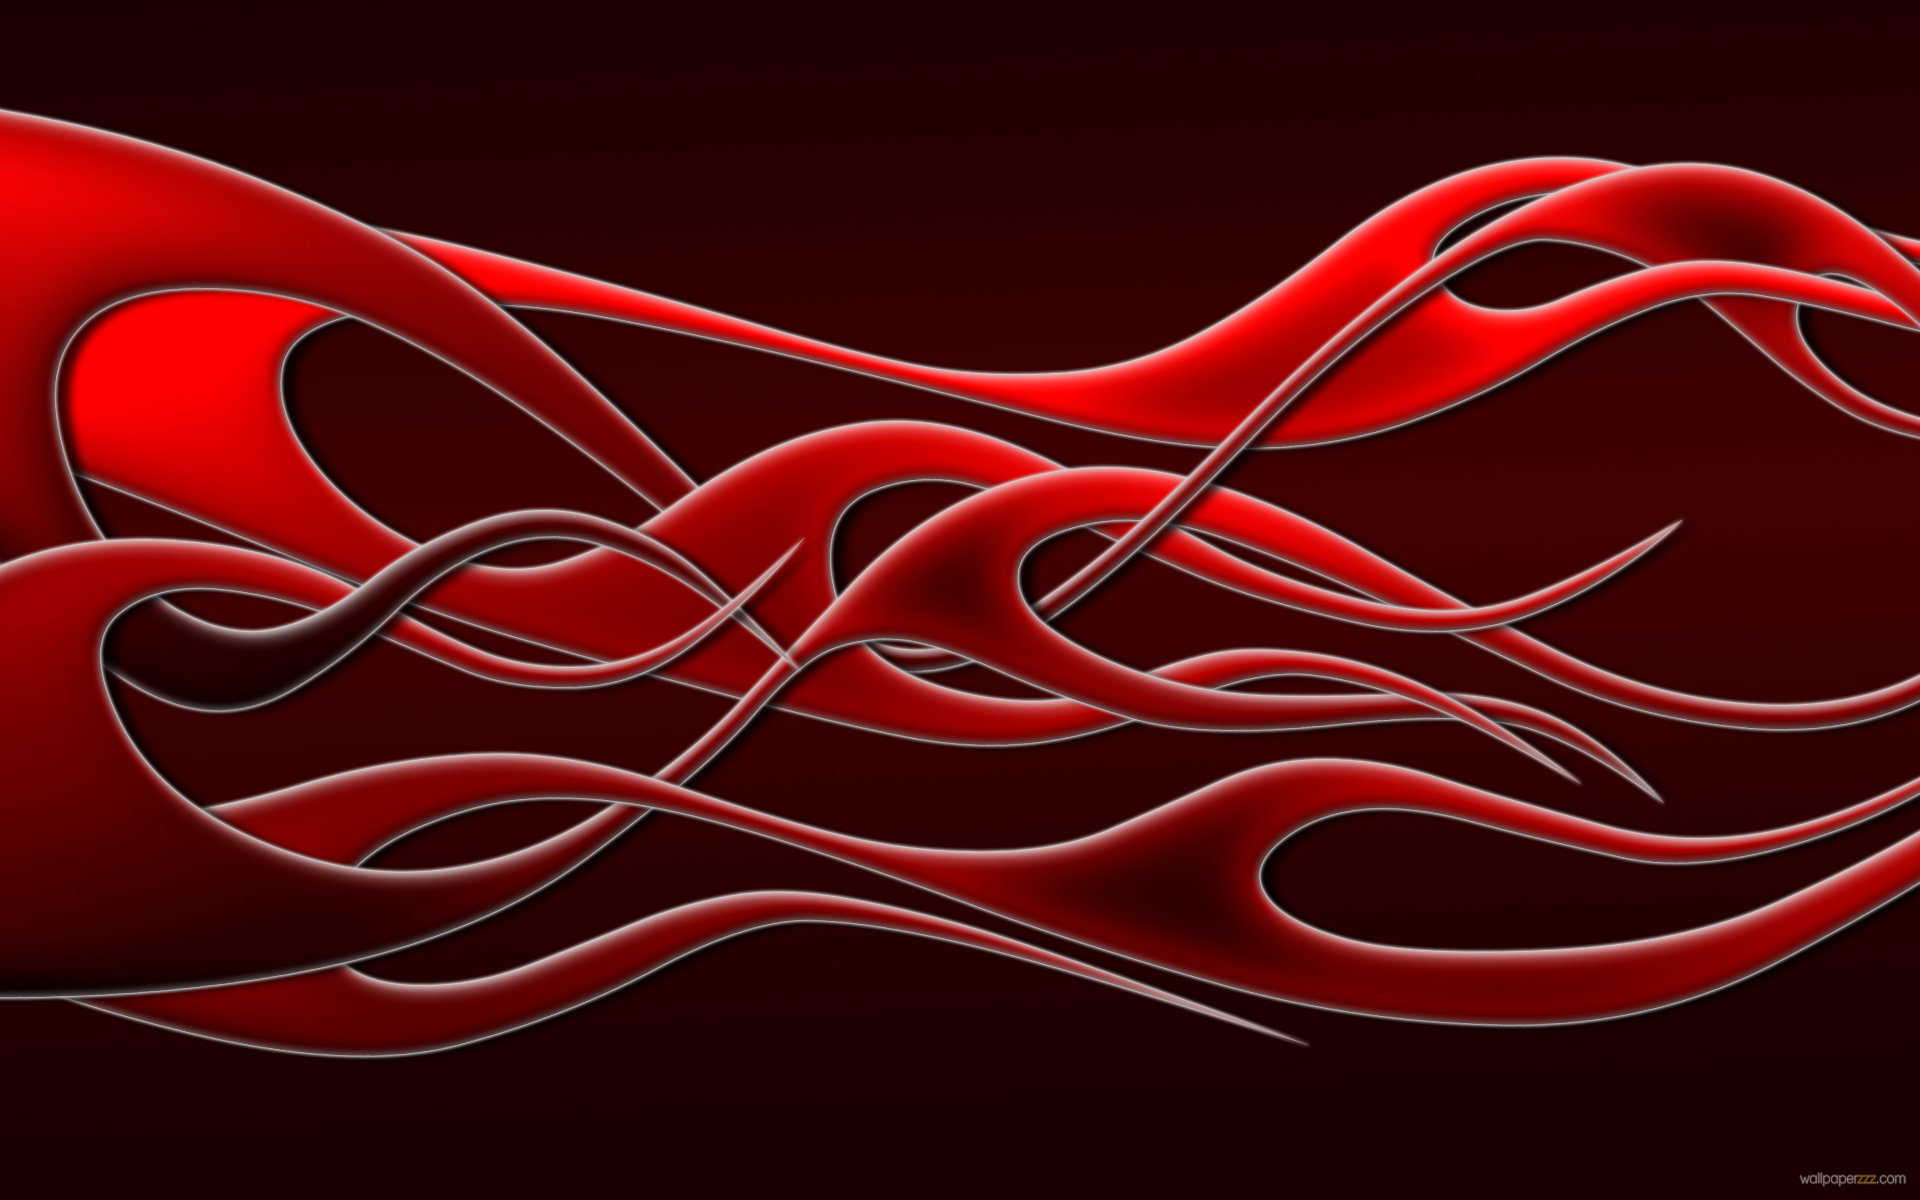 Blue Flames Red And Pin Flame Hd Widescreen High Definition 1366x768